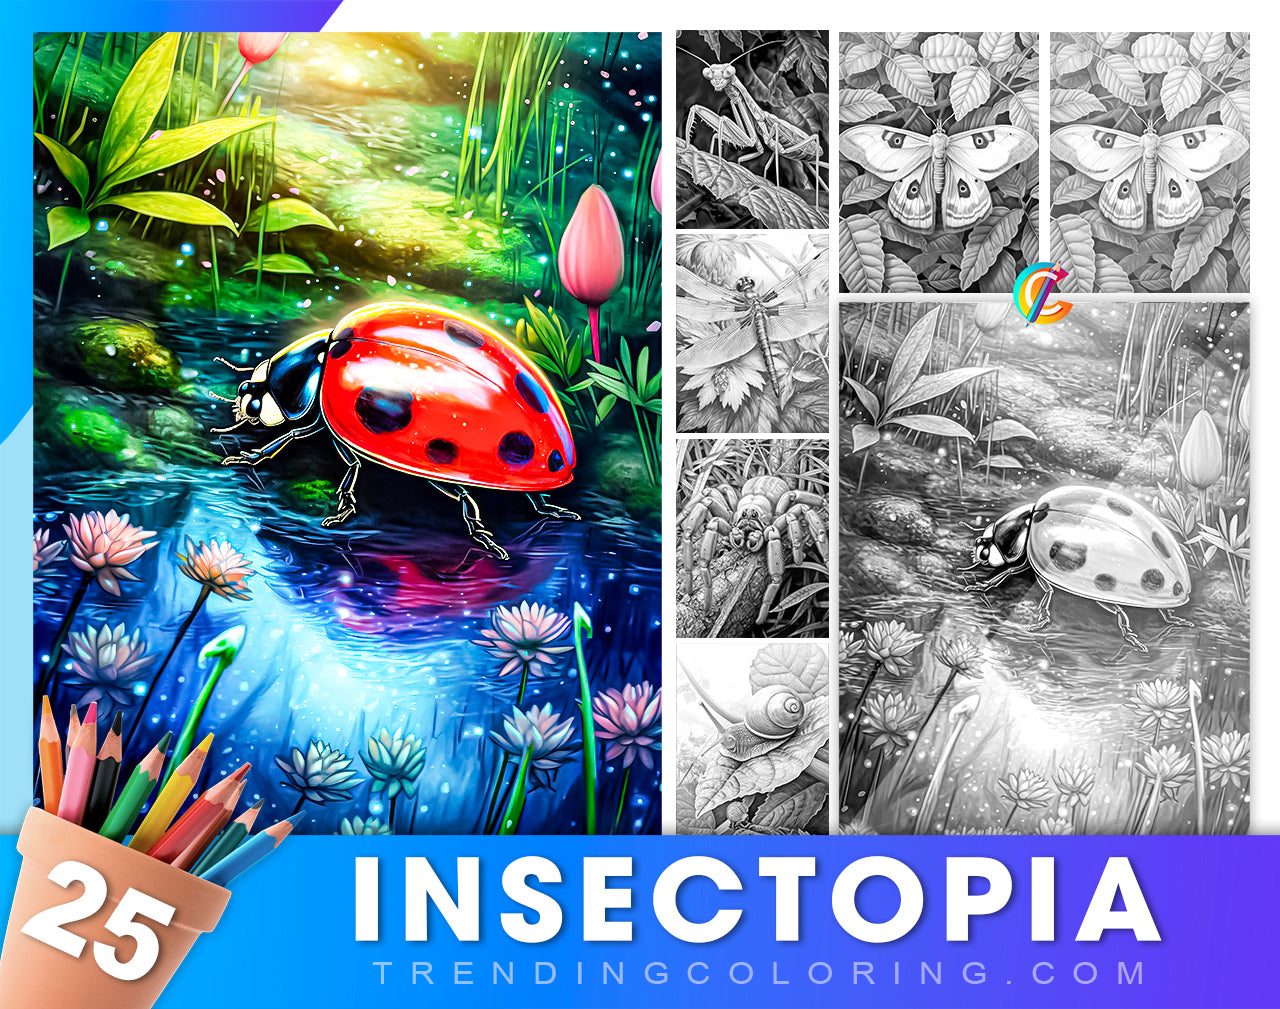 25 Insectopia Grayscale Coloring Pages  - Instant Download - Printable PDF Dark/Light